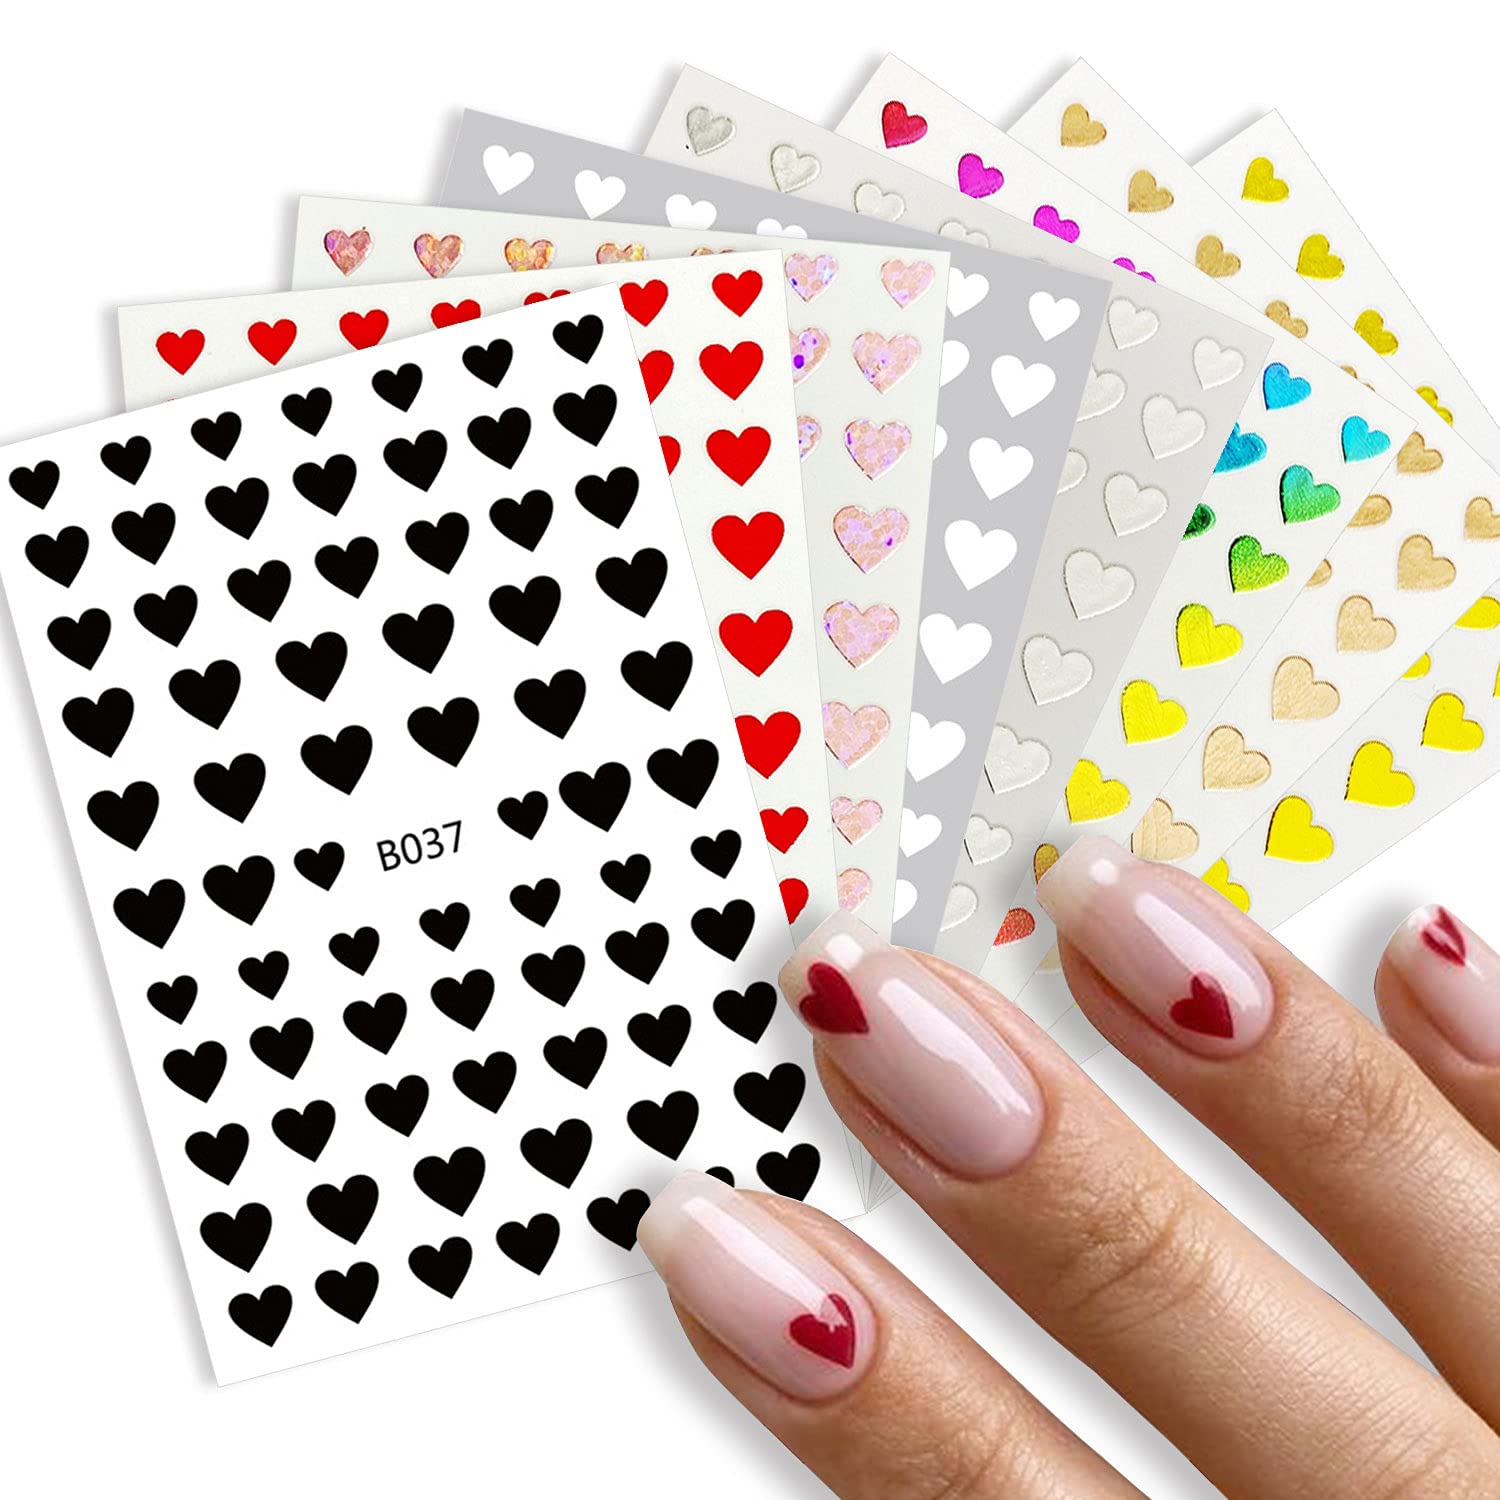 

8 Sheets Laser Heart Love Nail Art Stickers Decals 3d Self-adhesive Nail Art Stickers Holographic Heart Love Nail Art Decorations Stars Decals Manicure Accessories For Valentine's Day